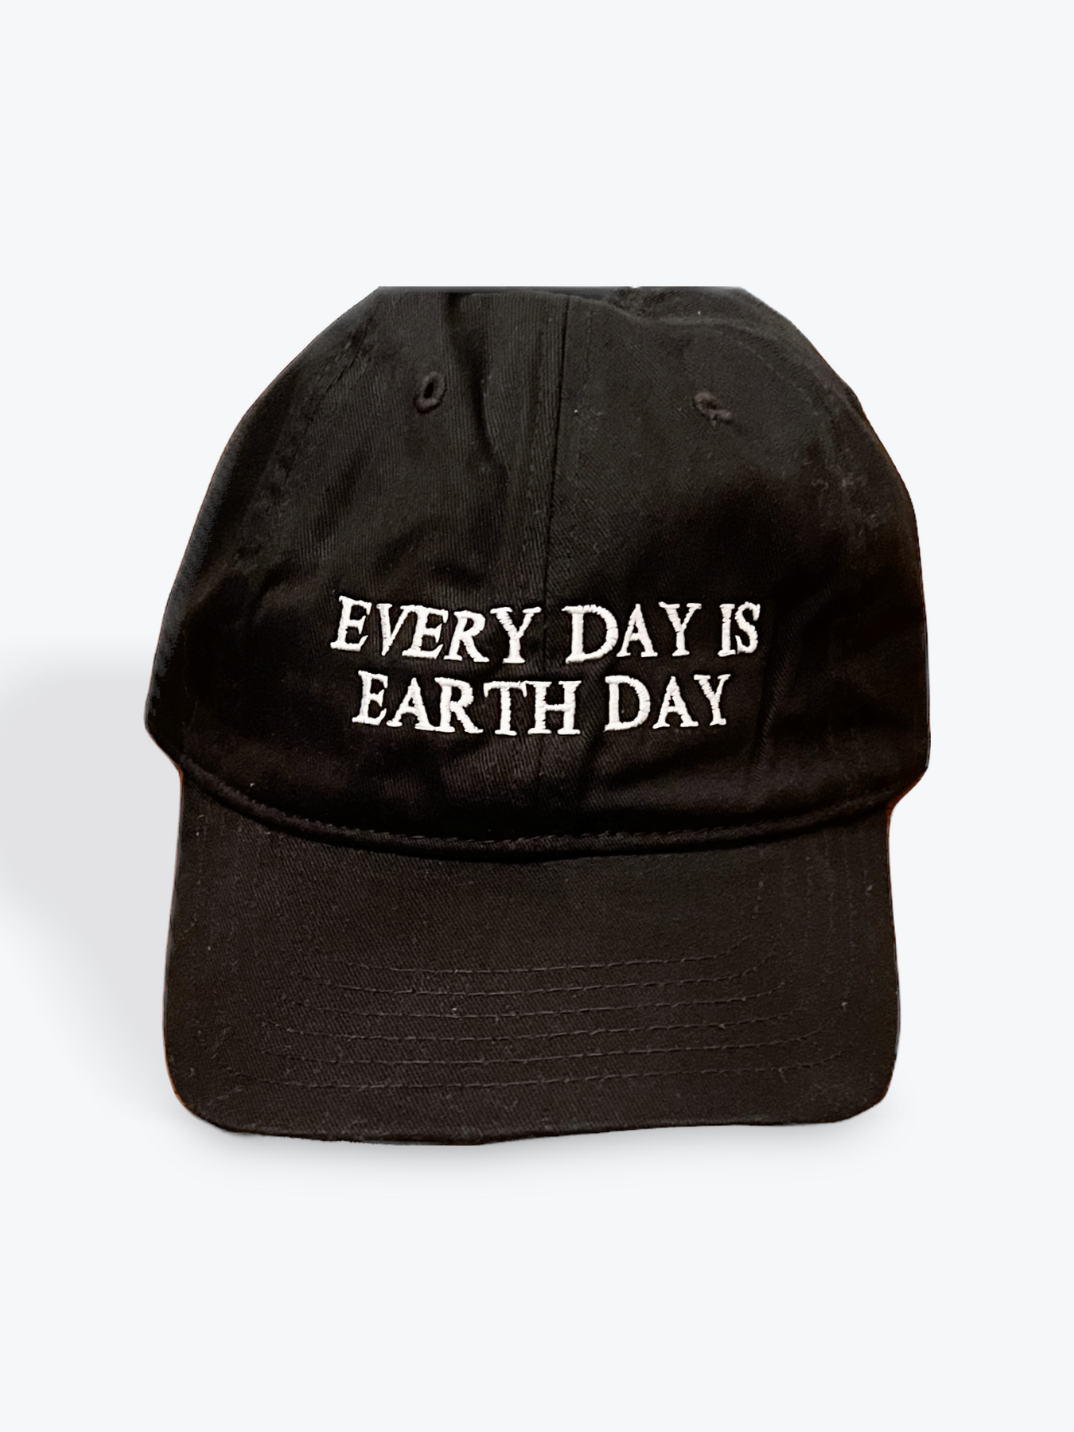 black baseball cap 100% organic cotton made in USA every day is earth day sustainable eco-friendly organic cotton